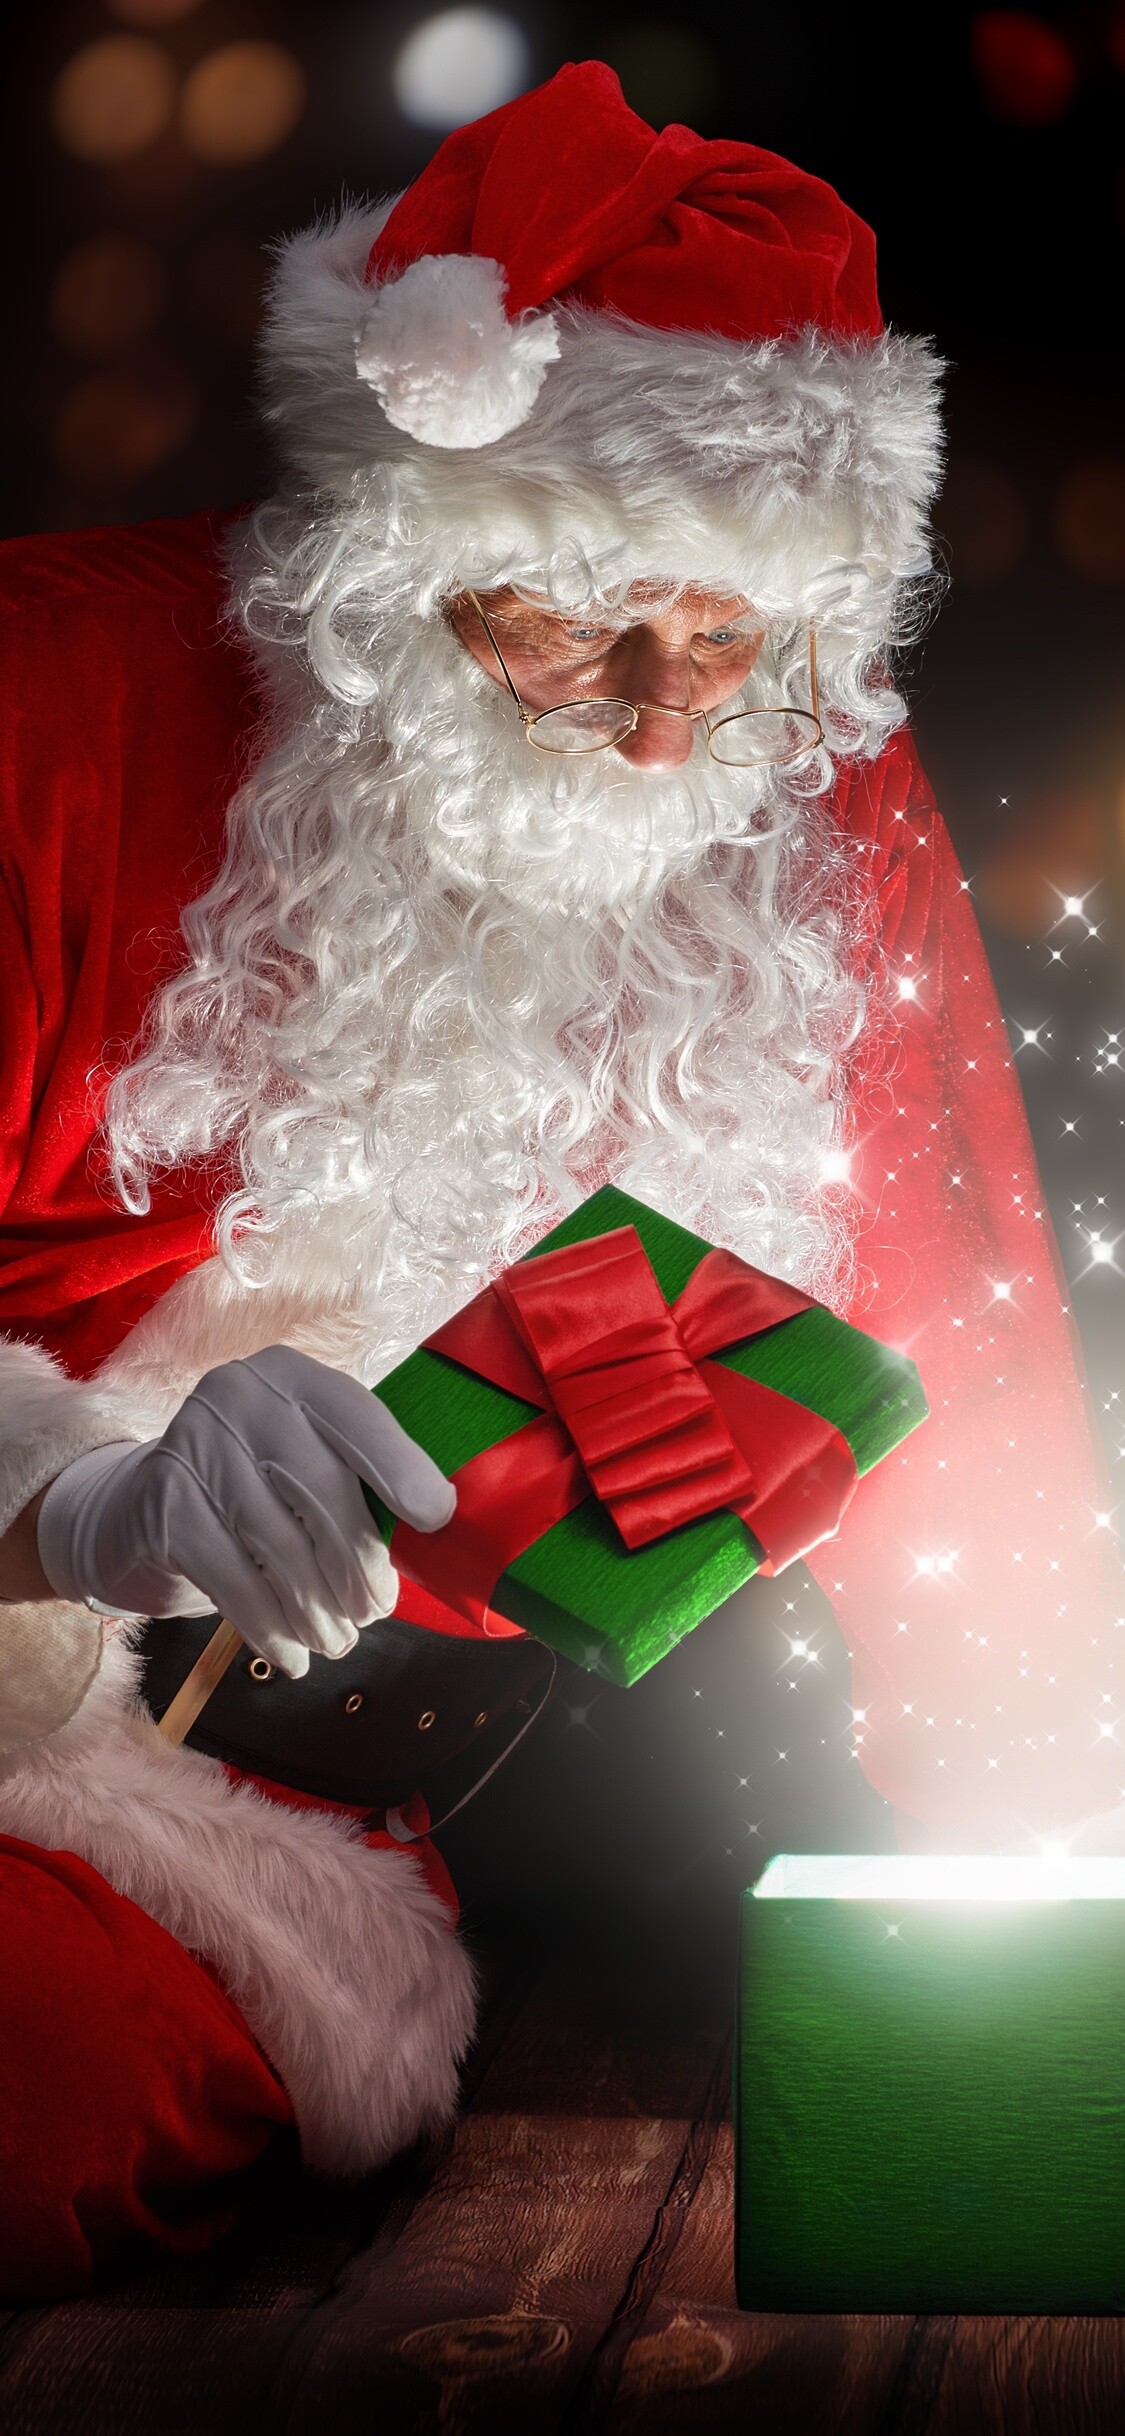 Santa Claus: The Night Before Christmas, Father Christmas, Holidays. 1130x2440 HD Wallpaper.